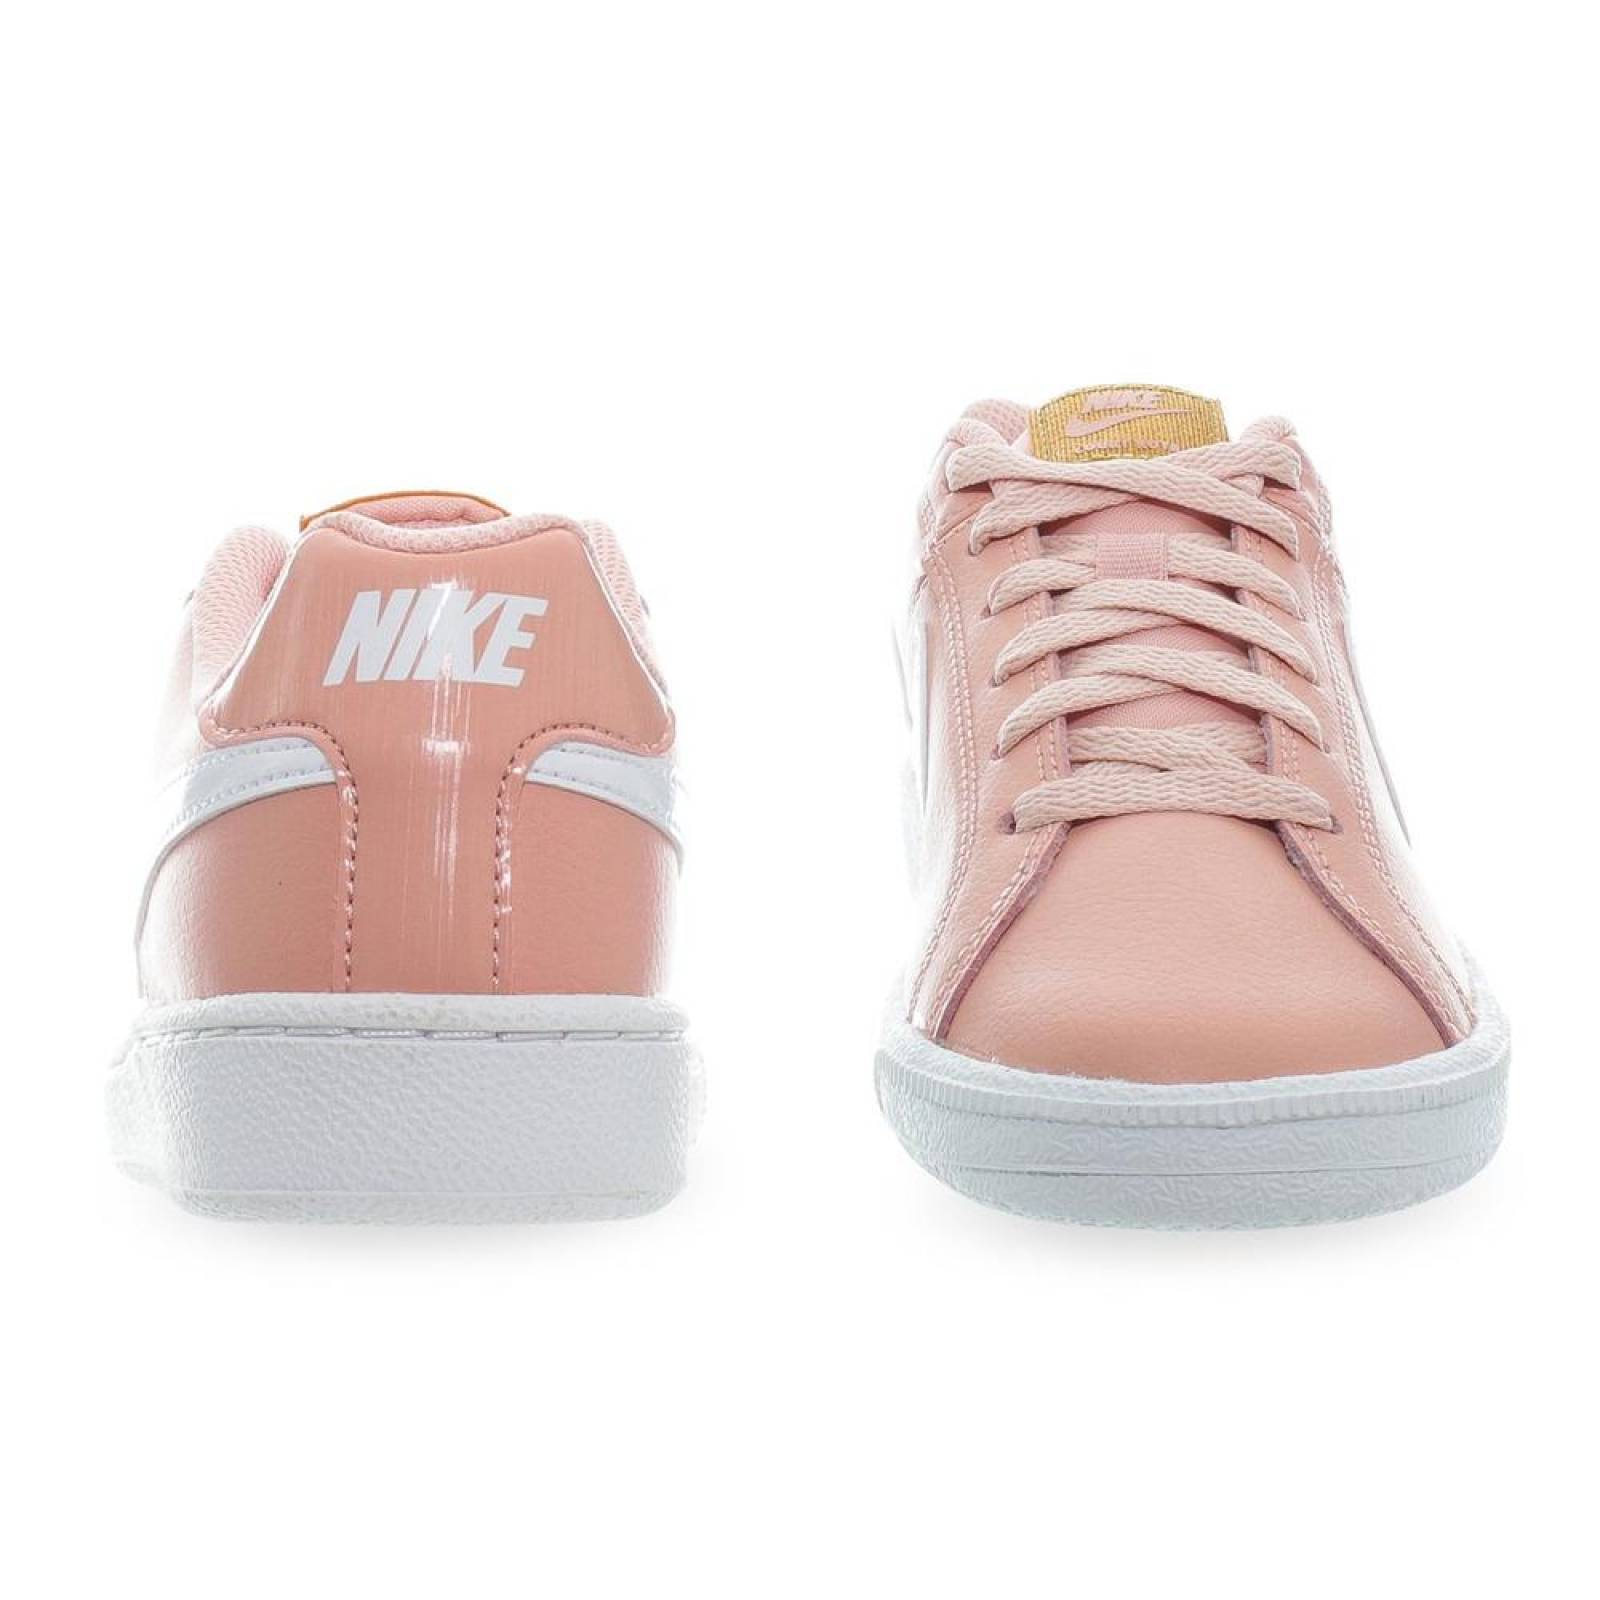 Tenis Nike Court Royale - 749867602 - Rosa - Mujer 